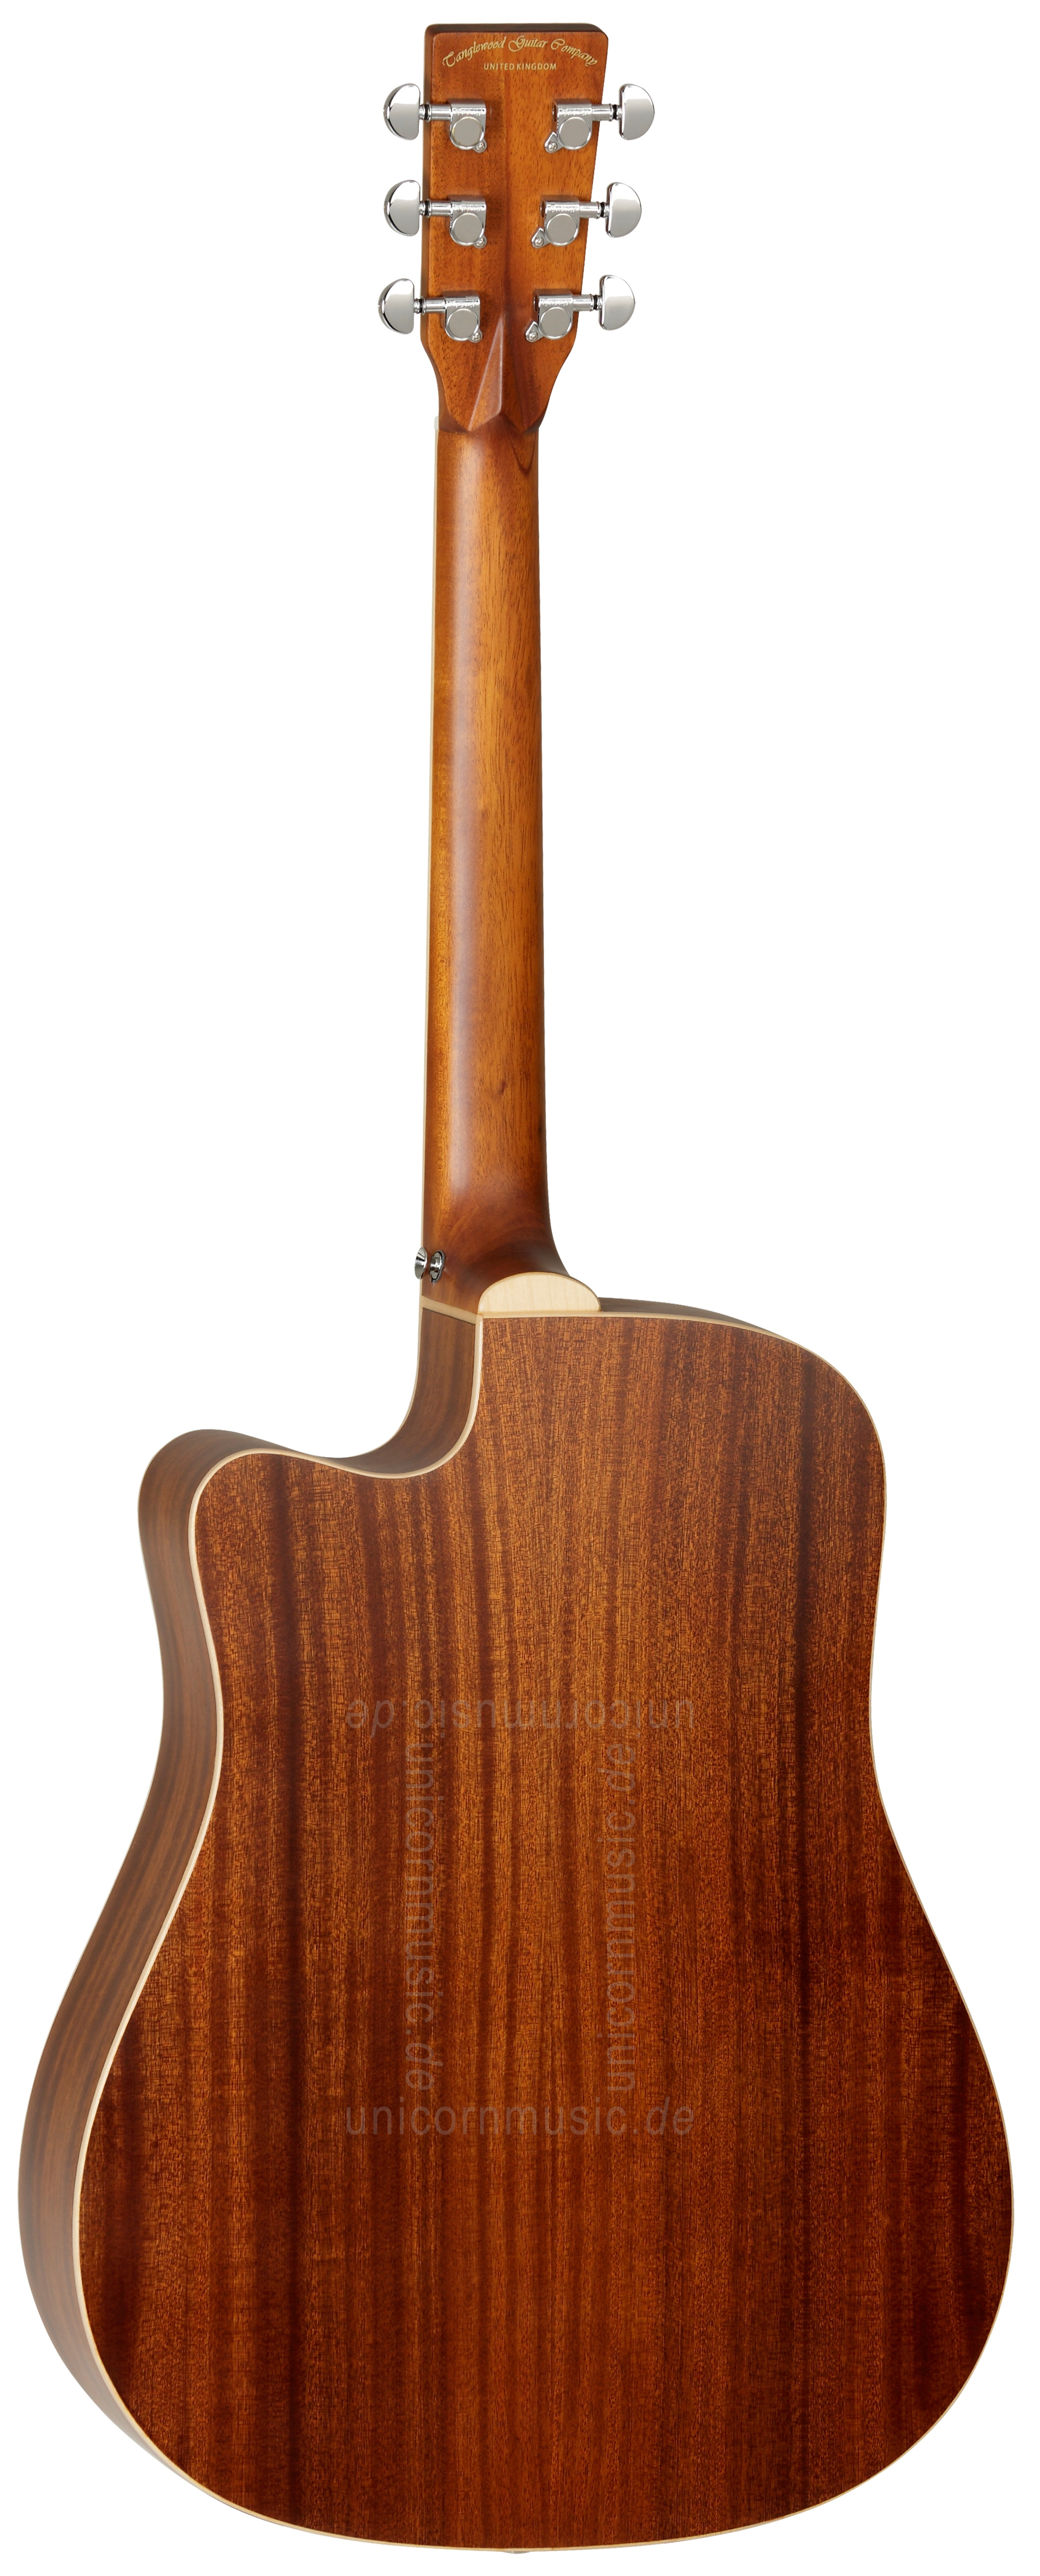 to article description / price Acoustic Guitar TANGLEWOOD TW15/ASM CE  - Sundance Series - Mahagoni - Dreadnought - all solid